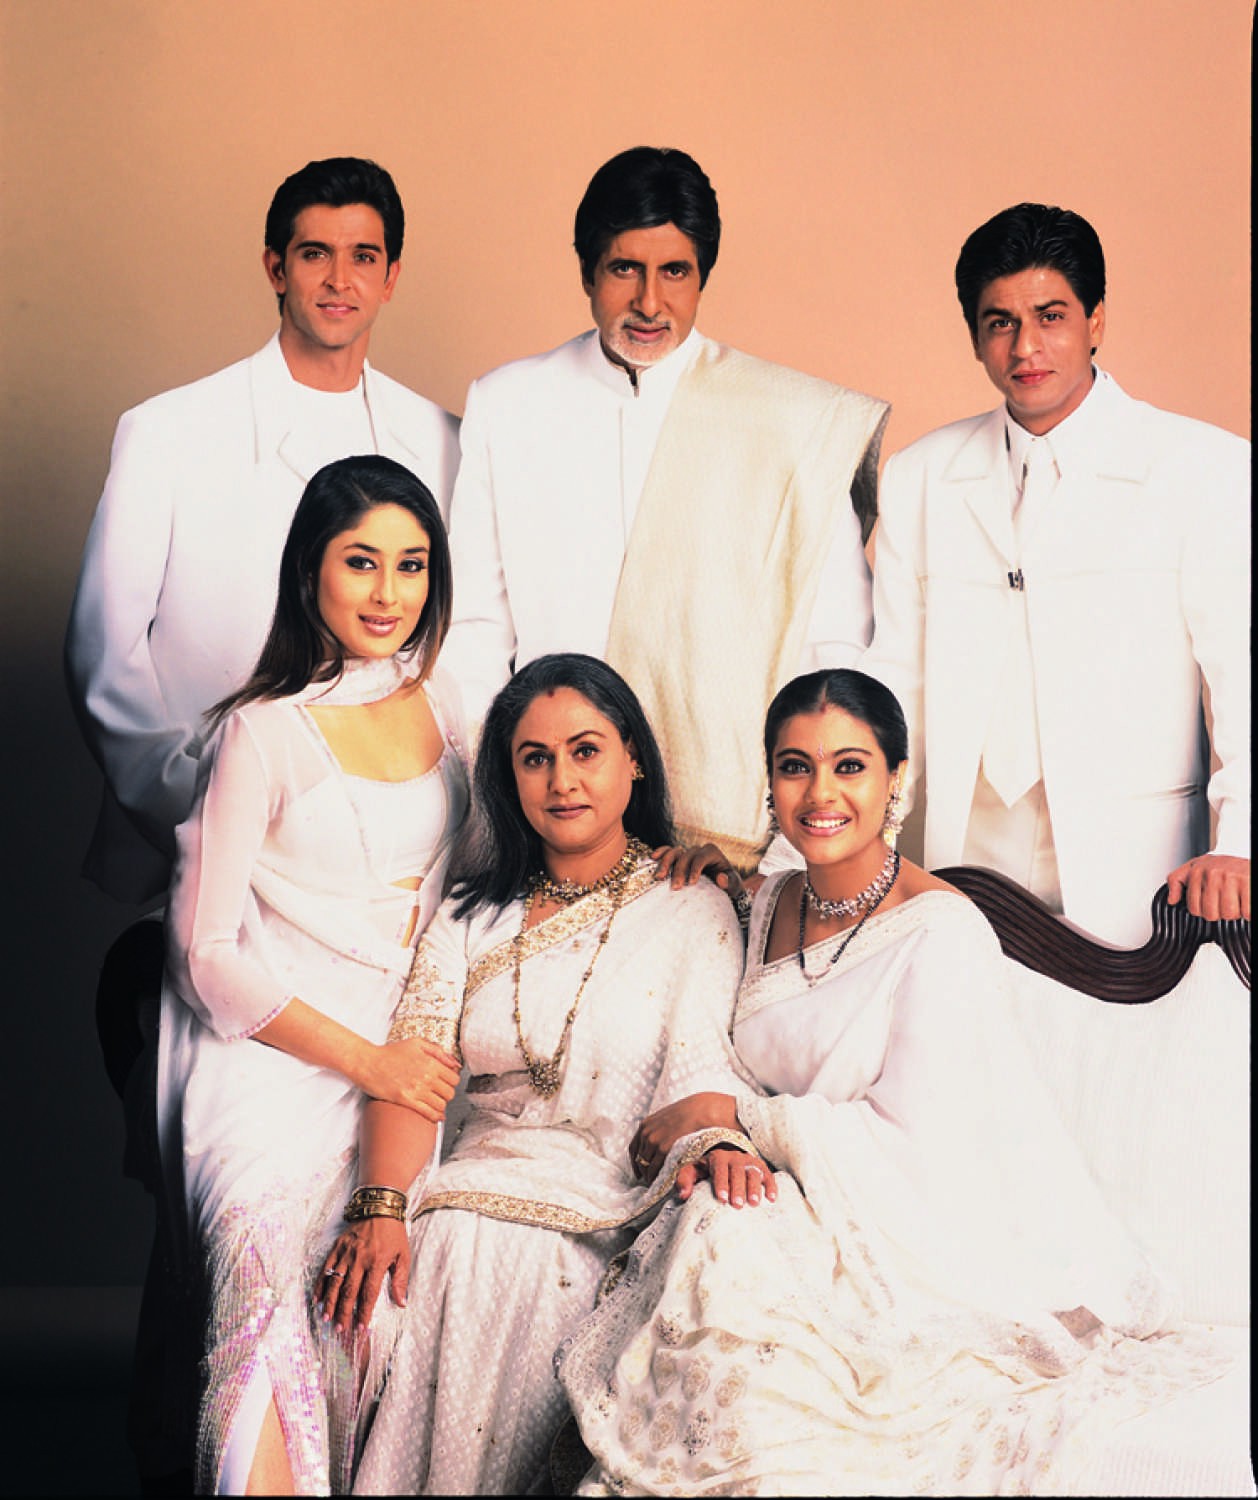 Kabhi Khushi Kabhie Gham Movie Review Karan Johars multi starrer film Kabhi Khushi Kabhie Gham offers thequintessential Bollywood experience filled with intense drama, lavish song and dance sequences, fabulous styling and stunning photo pic